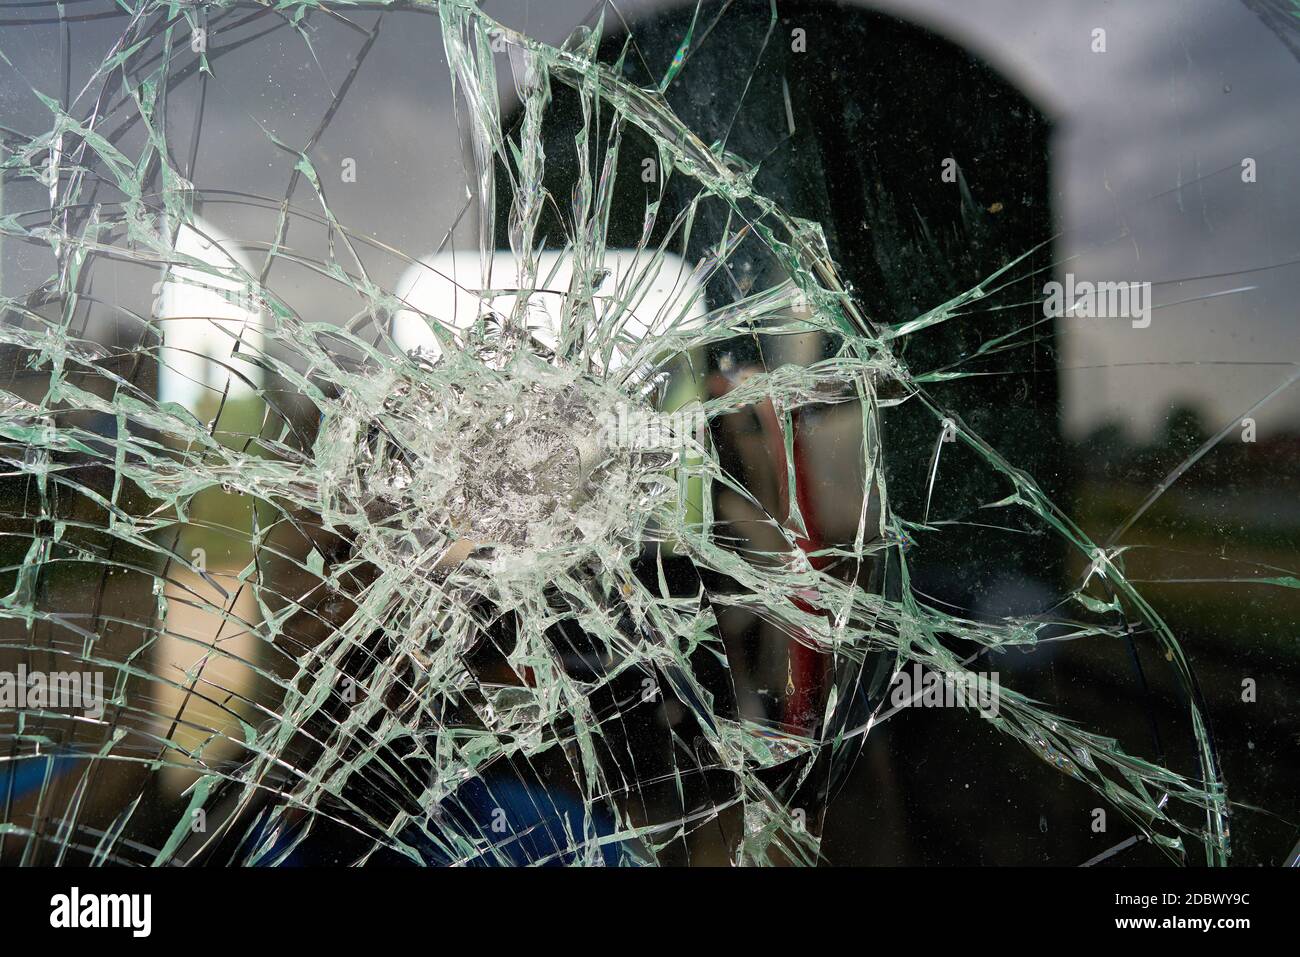 destroyed glass of the window pane of a railway wagon Stock Photo